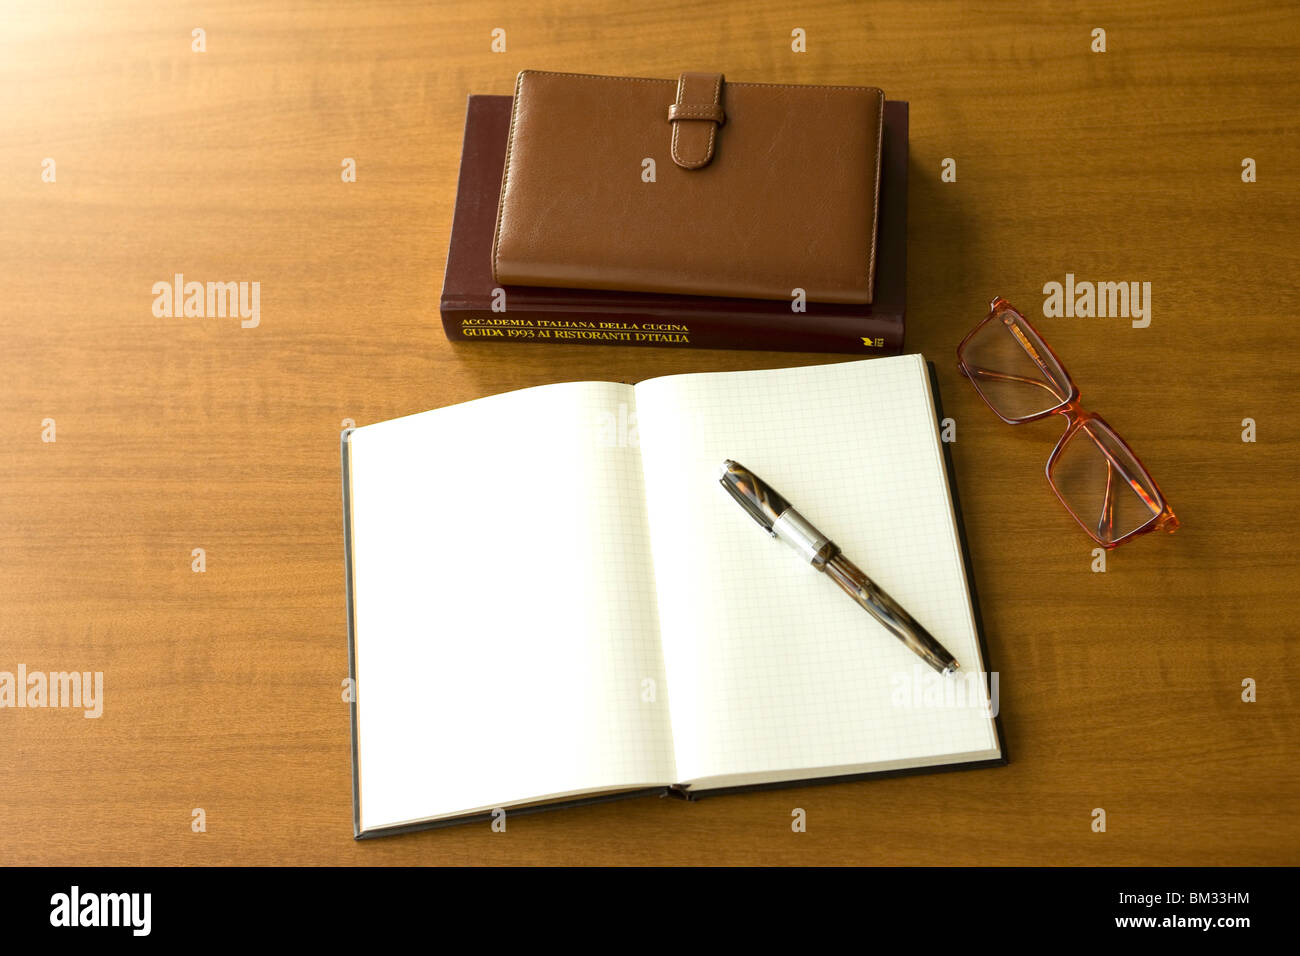 Diary, pen, note pad and glasses on a desk Stock Photo